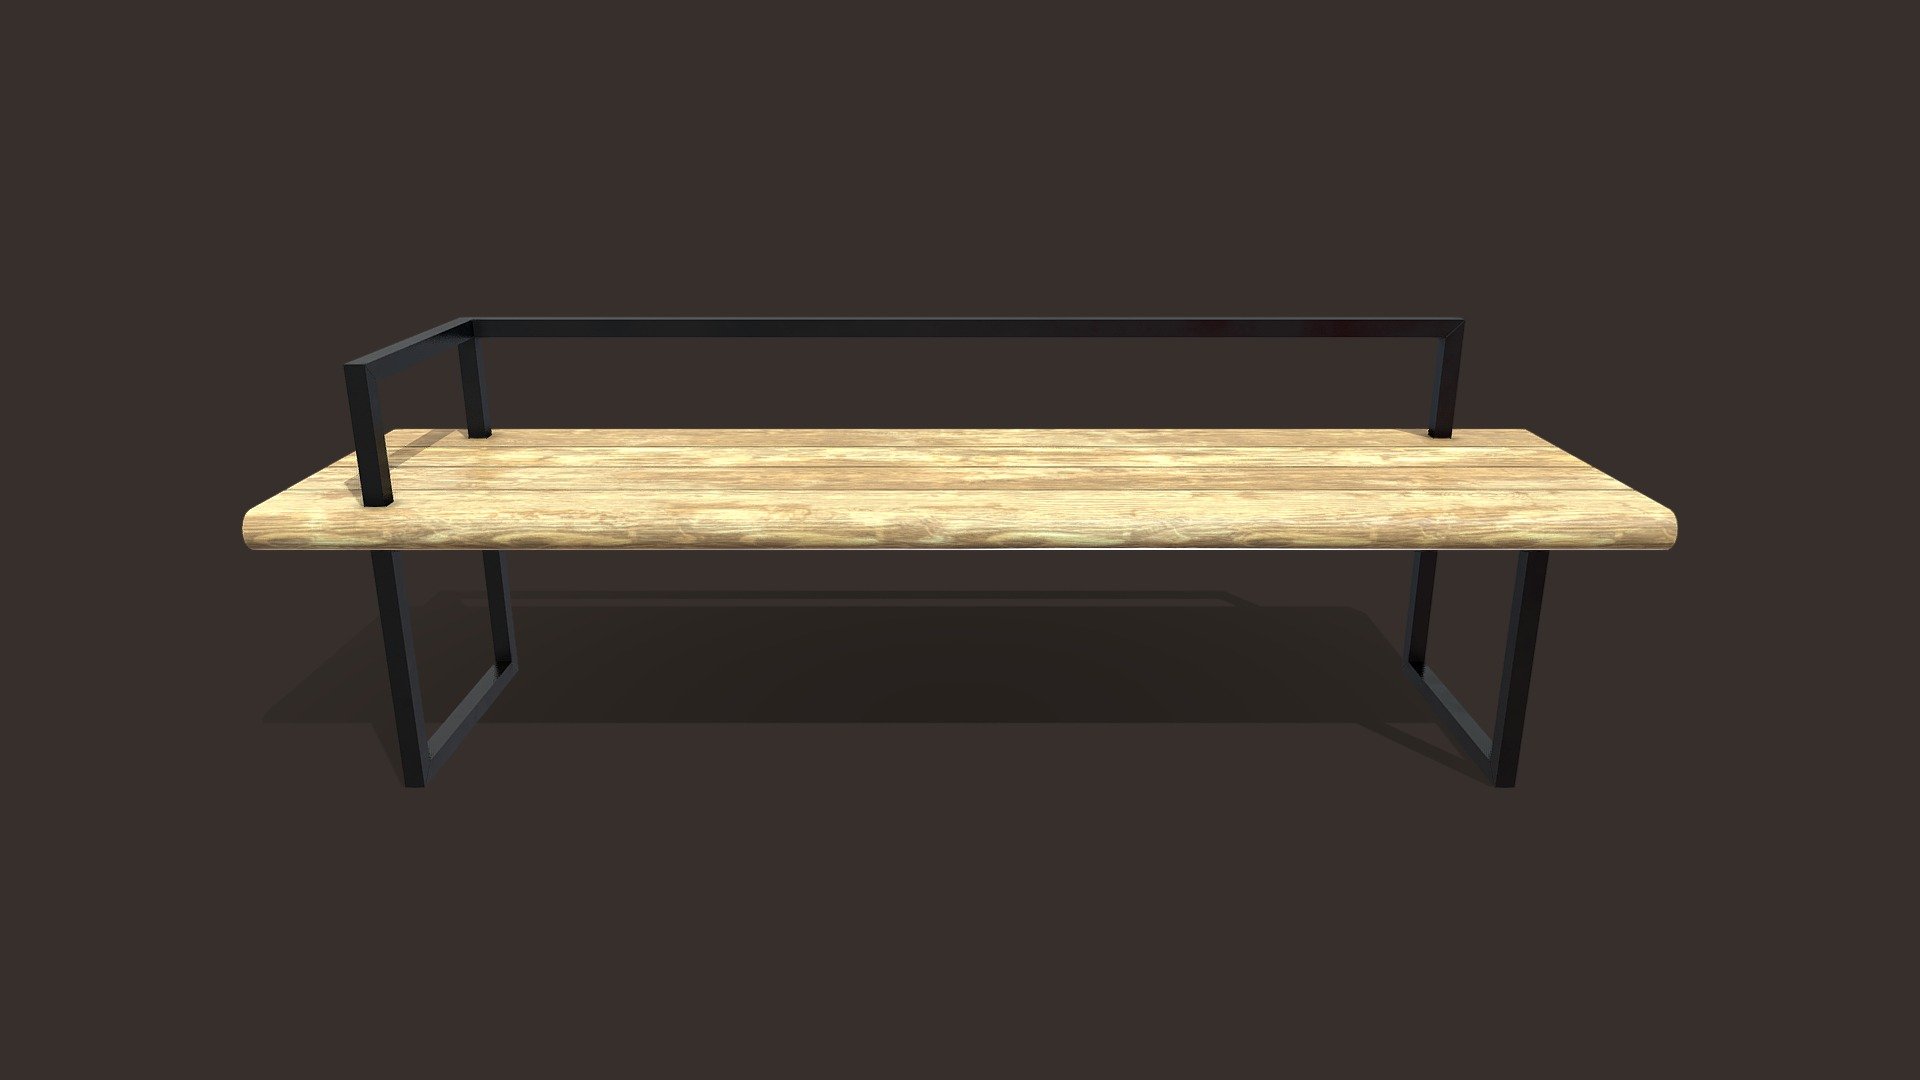 Waiting Bench is a model that will enhance detail and realism to any of your rendering projects. The model has a fully textured, detailed design that allows for close-up renders, and was originally modeled in Blender 3.5, Textured in Substance Painter 2023 and rendered with Adobe Stagier Renders have no post-processing.

Features: -High-quality polygonal model, correctly scaled for an accurate representation of the original object. -The model’s resolutions are optimized for polygon efficiency. -The model is fully textured with all materials applied. -All textures and materials are included and mapped in every format. -No cleaning up necessary just drop your models into the scene and start rendering. -No special plugin needed to open scene.

Measurements: Units: M

File Formats: OBJ FBX

Textures Formats: PNG 4k - Waiting Bench - Buy Royalty Free 3D model by MDgraphicLAB 3d model